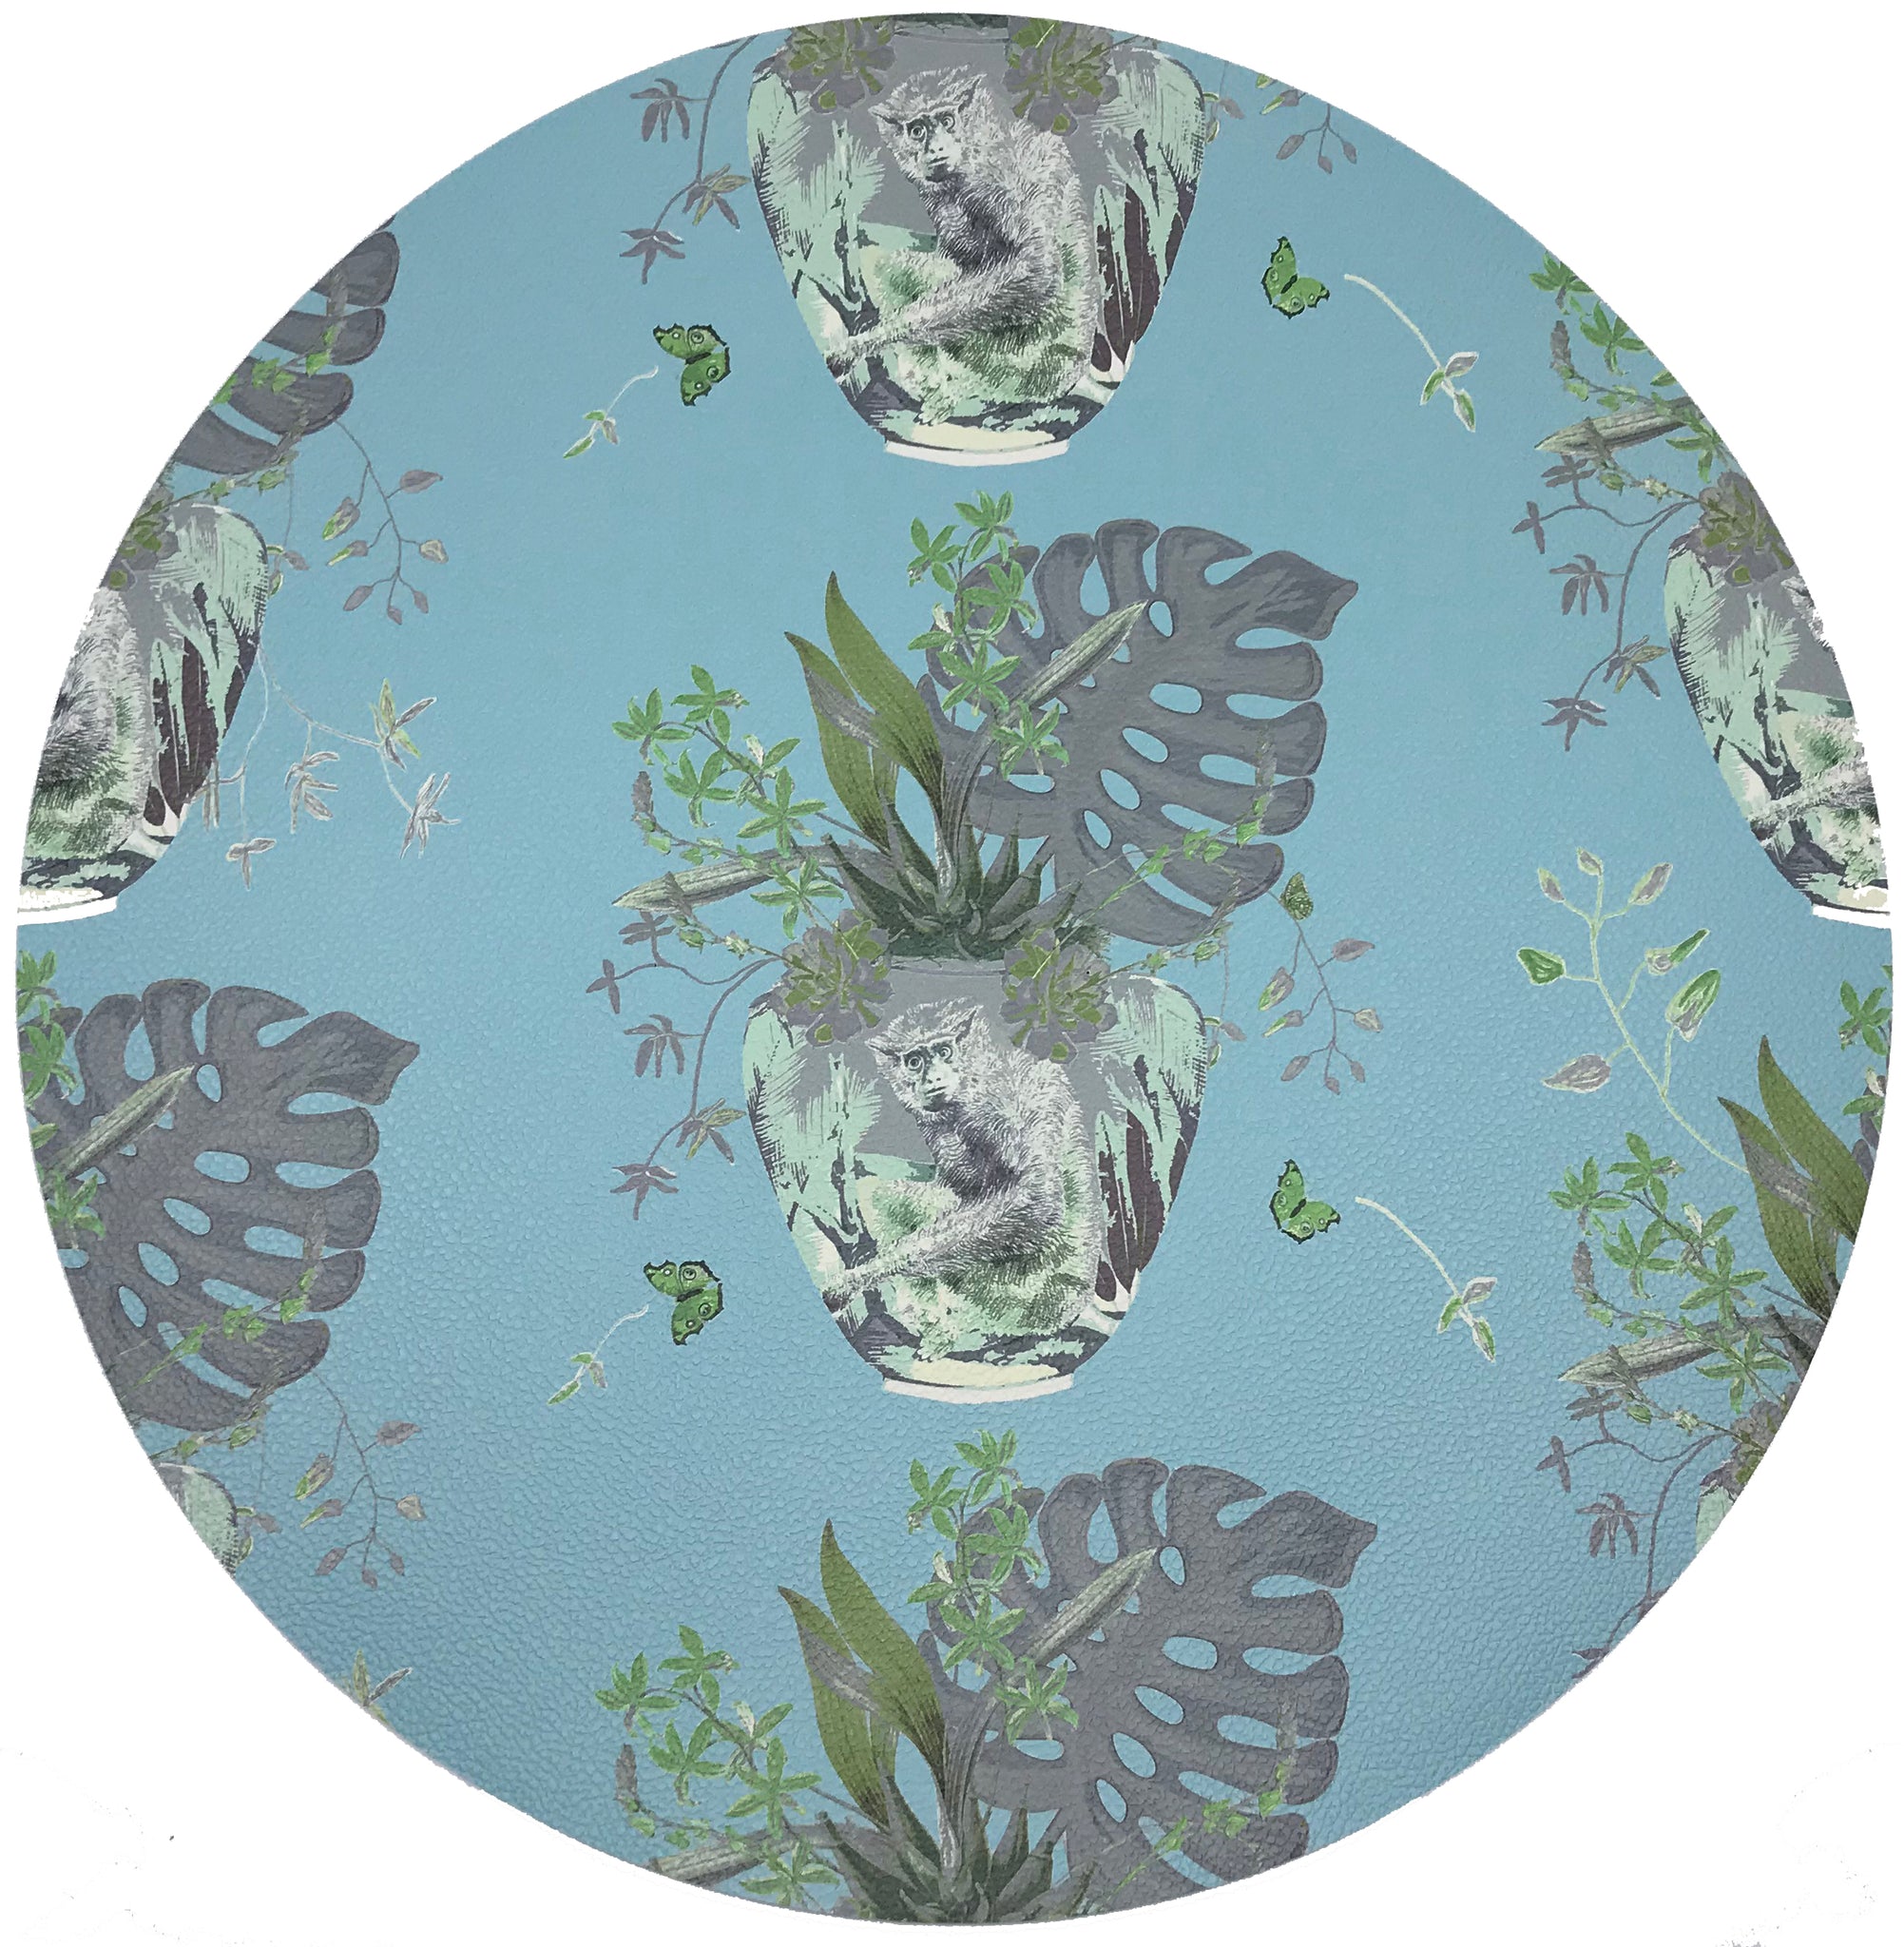 Monkey Small Jungle Bedford 16" Round Pebble Placemats, Set Of 4 - nicolettemayer.com